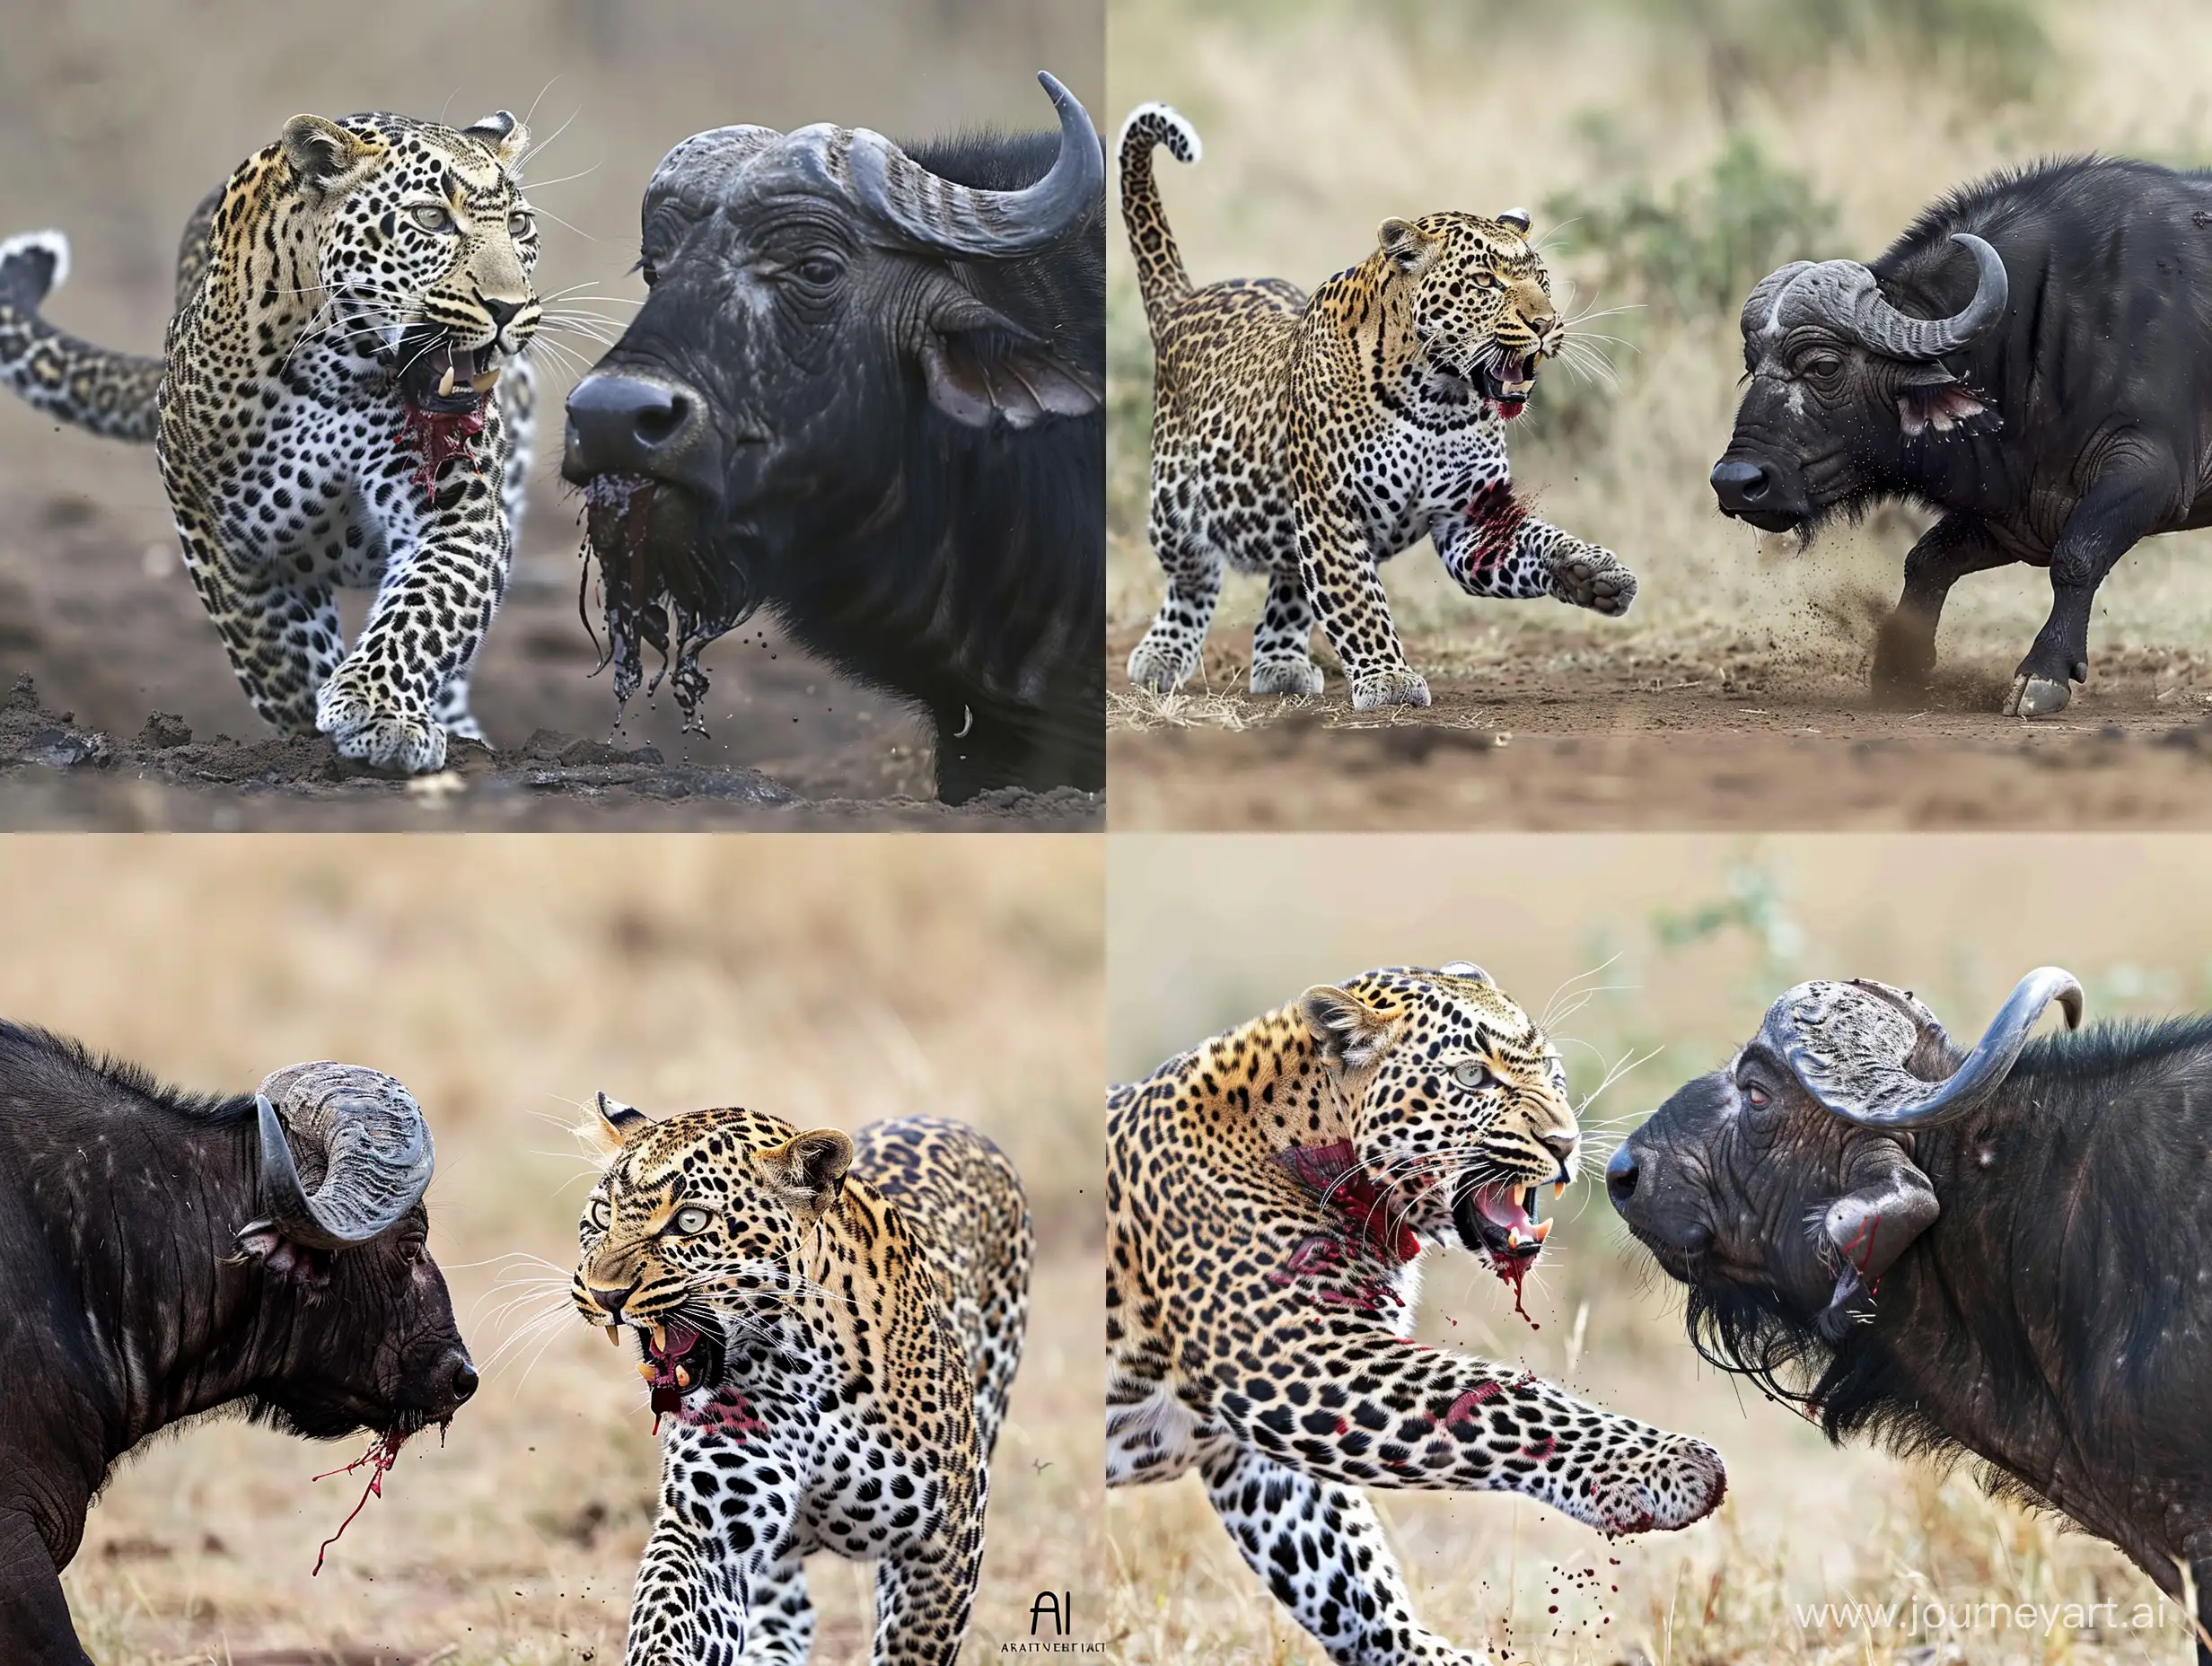 Witness the raw power of nature captured in this breathtaking moment: a leopard confronts its prey, a wild buffalo, with fierce determination. With blood-stained jaws and an intense gaze, this image embodies the bold essence of the wild. Join us for an exploration into the heart of the wilderness with AI as we delve into the untamed beauty of the animal kingdom.